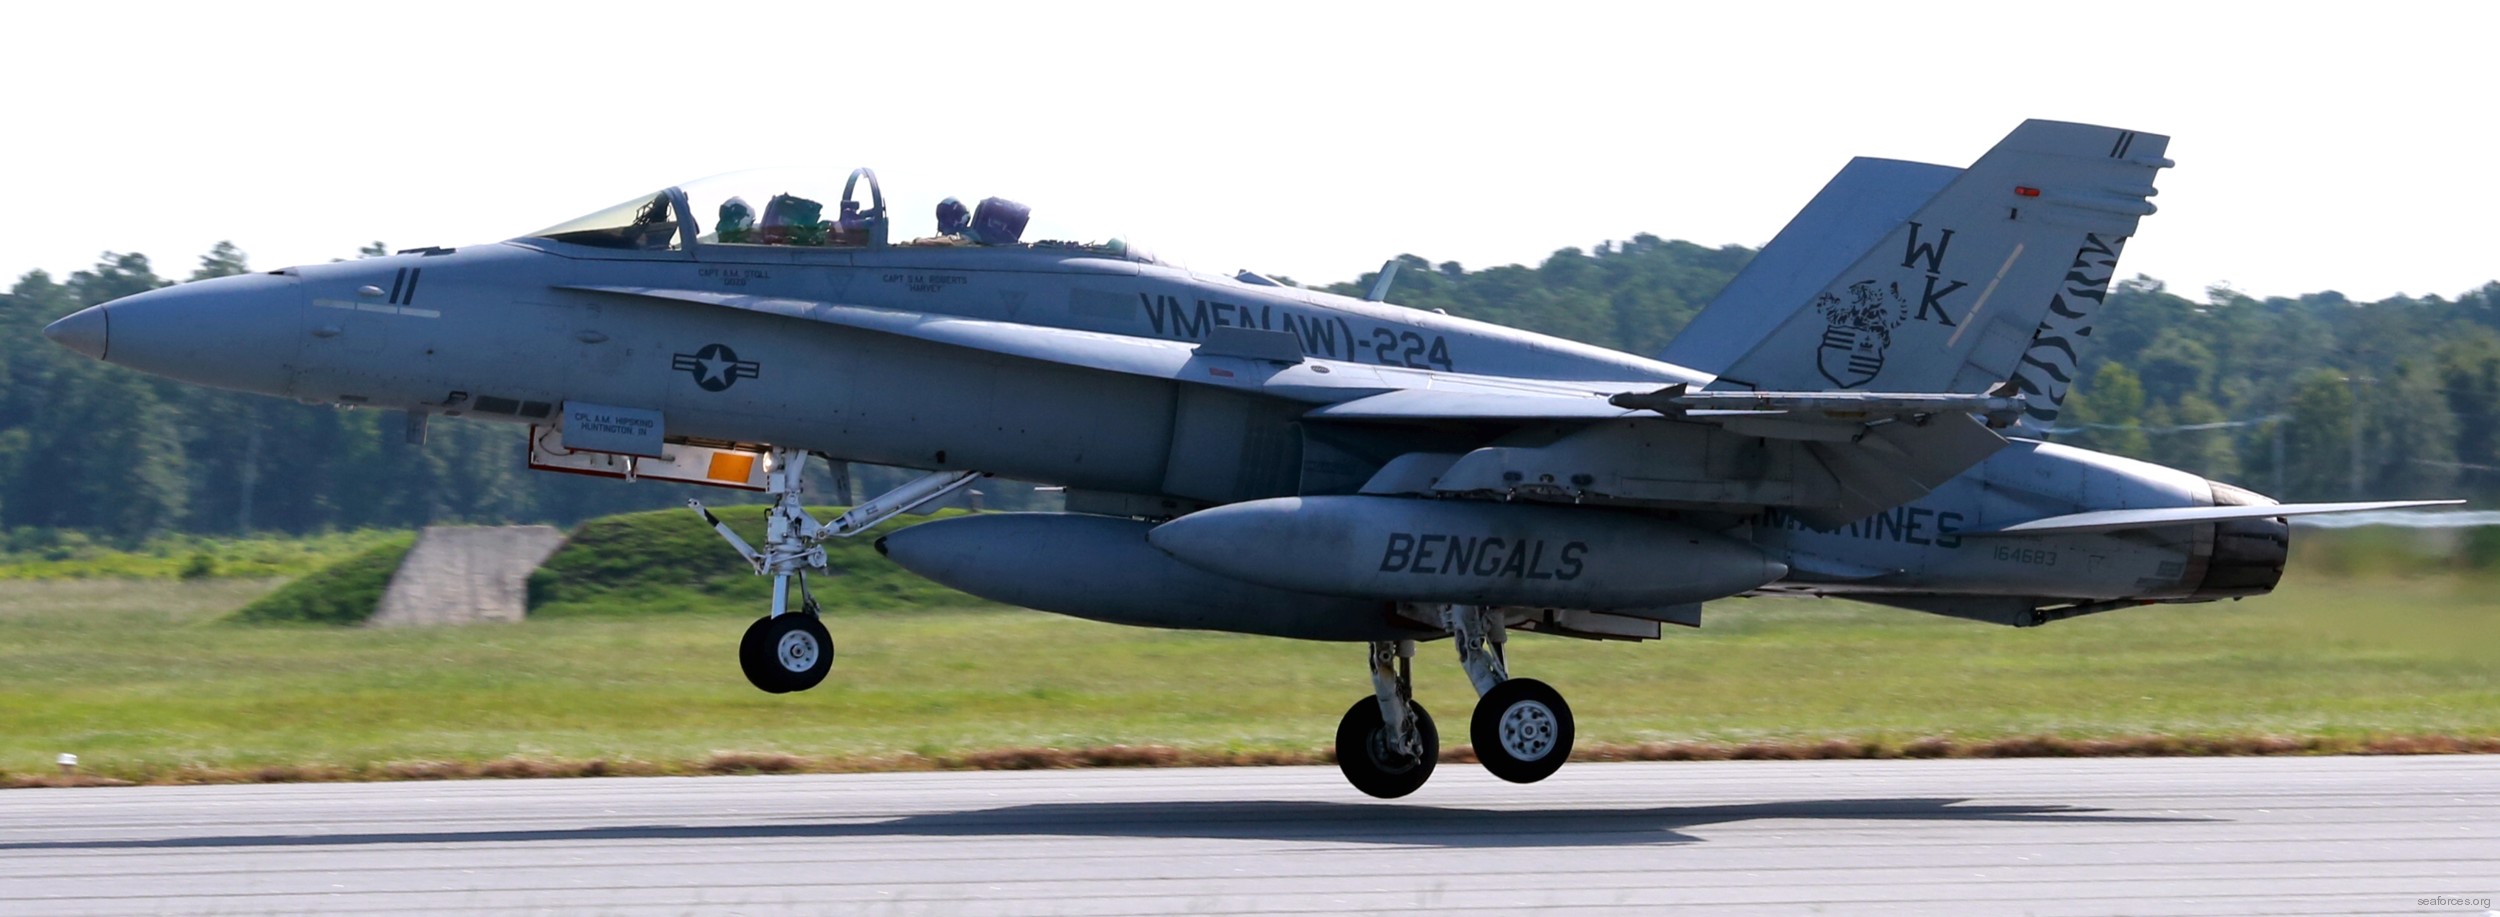 vmfa(aw)-224 bengals marine fighter attack squadron usmc f/a-18d hornet 26